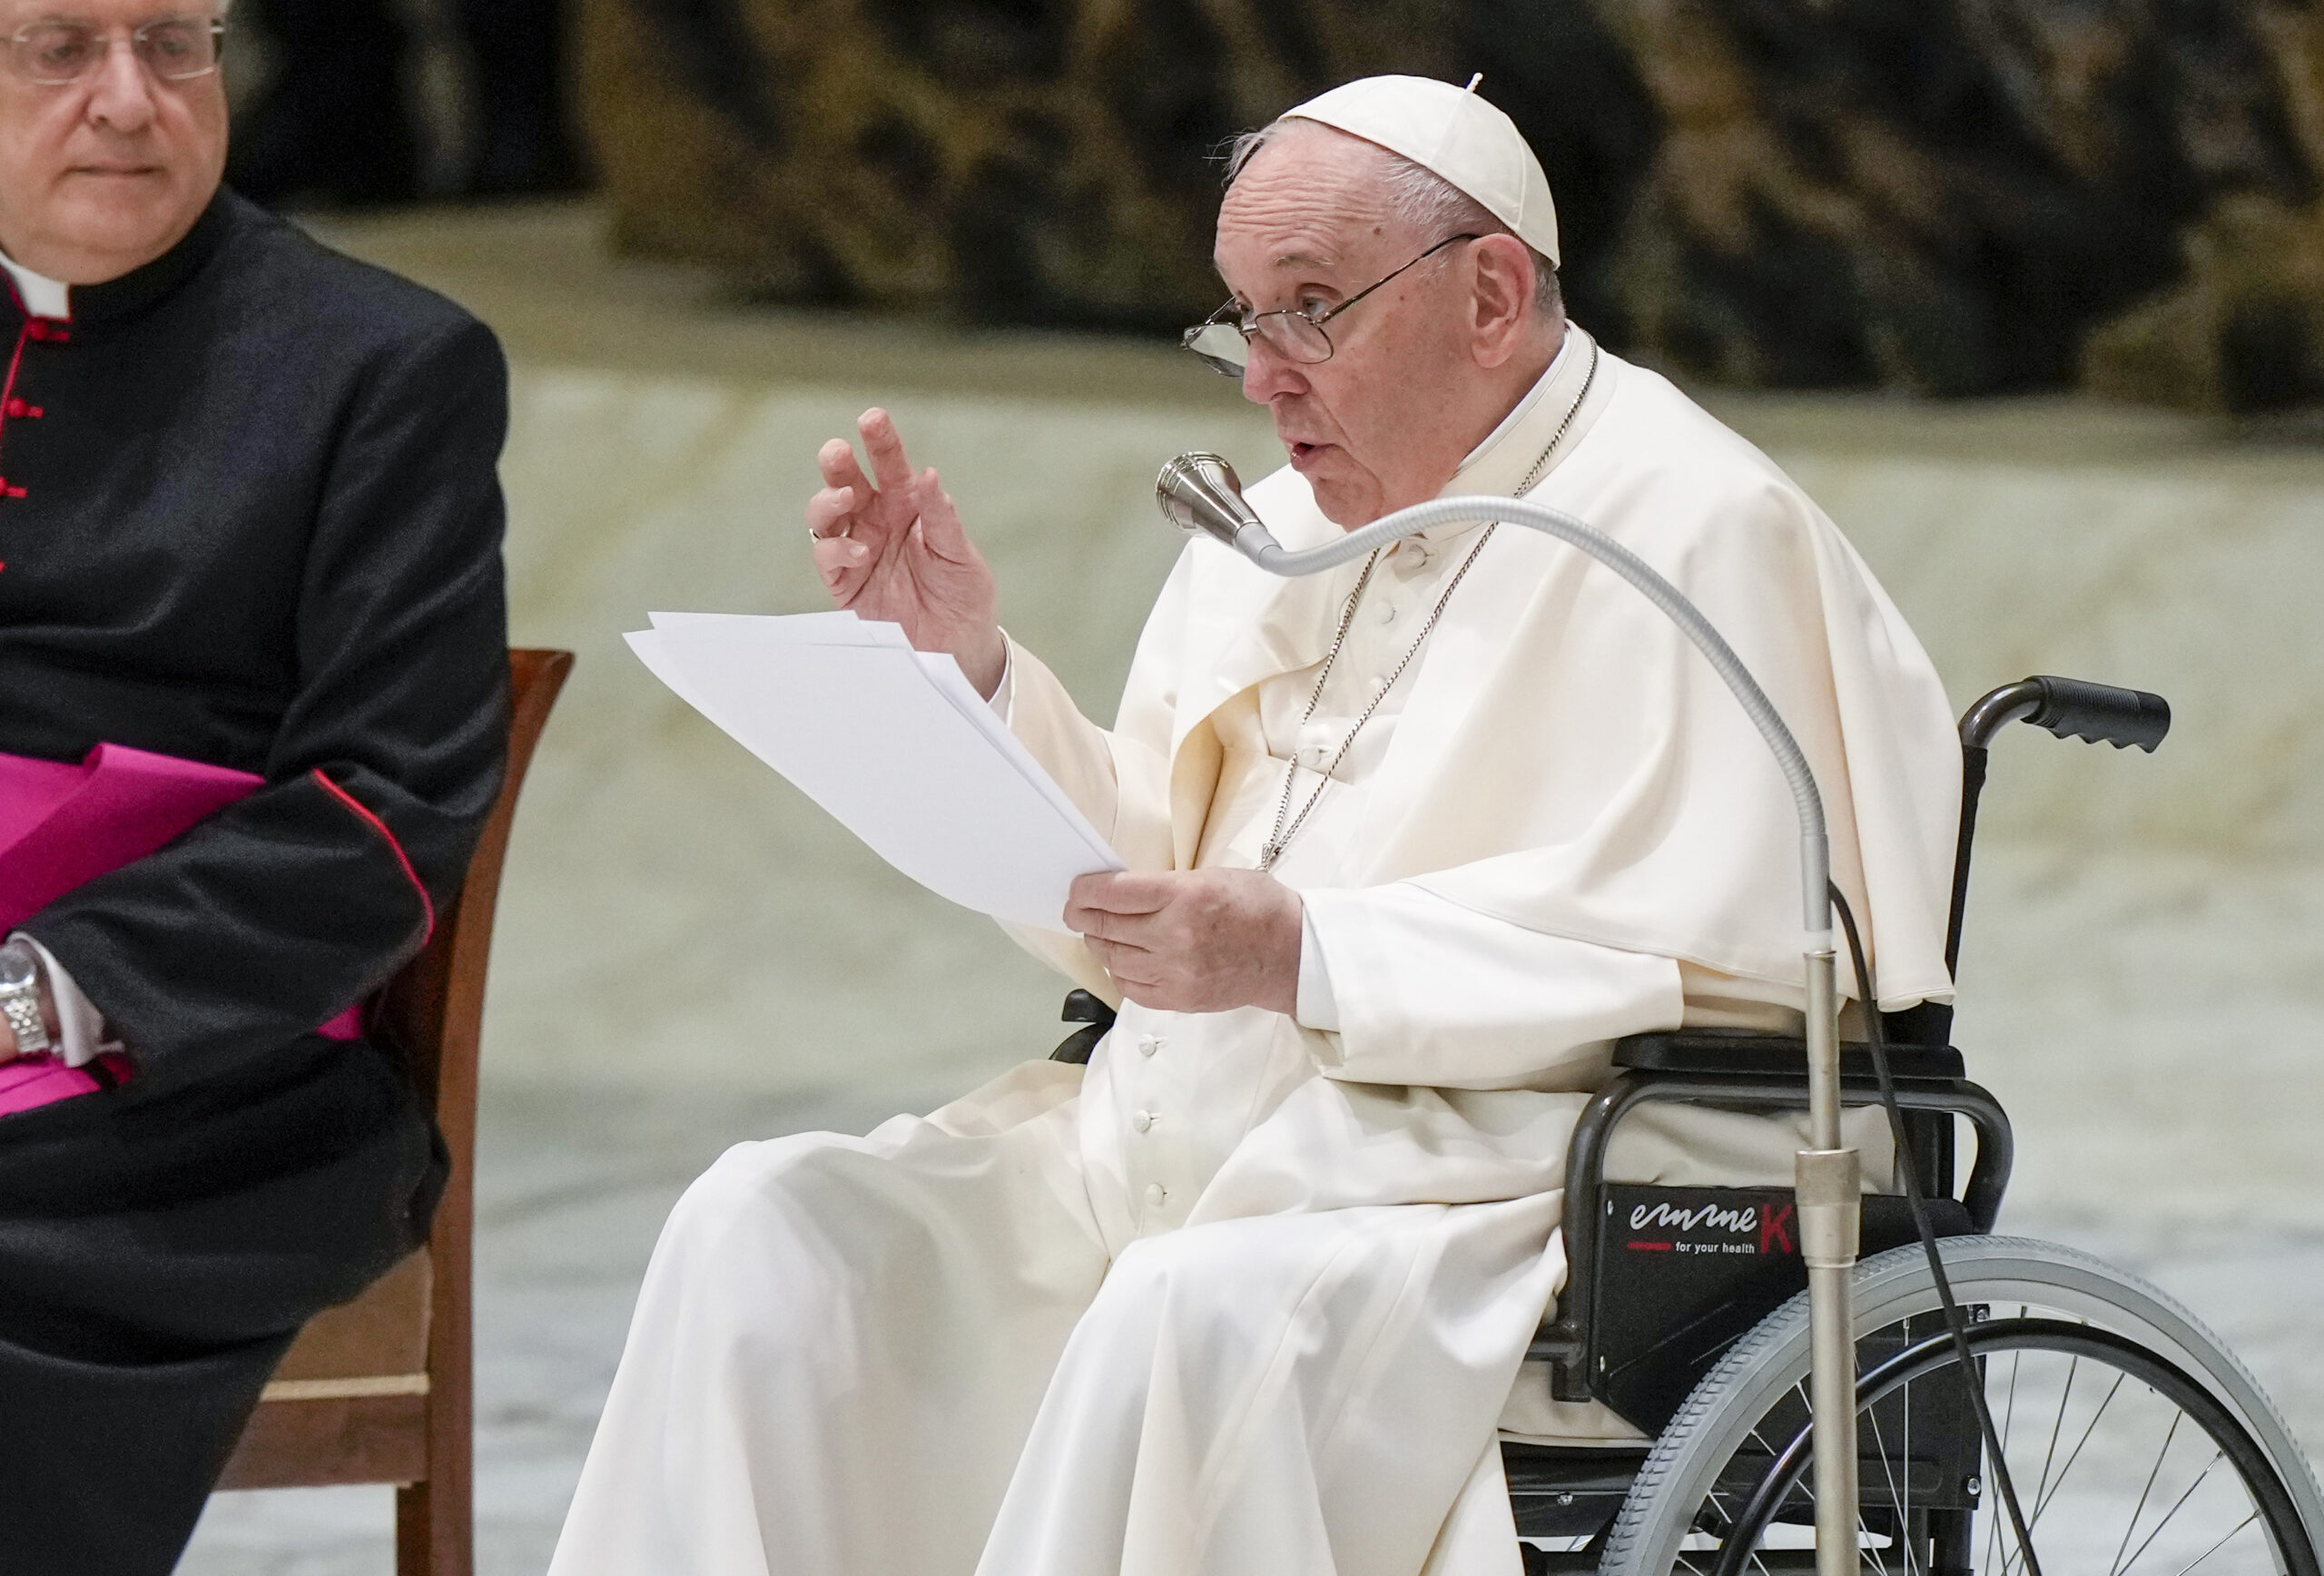 Pope Francis in a wheelchair delivers his address during an audience with members of the Italian Civil Aviation Authority in the Paul VI Hall at the Vatican, May 13, 2022. Francis suffers from strained ligaments in his right knee. (AP Photo/Andrew Medichini)